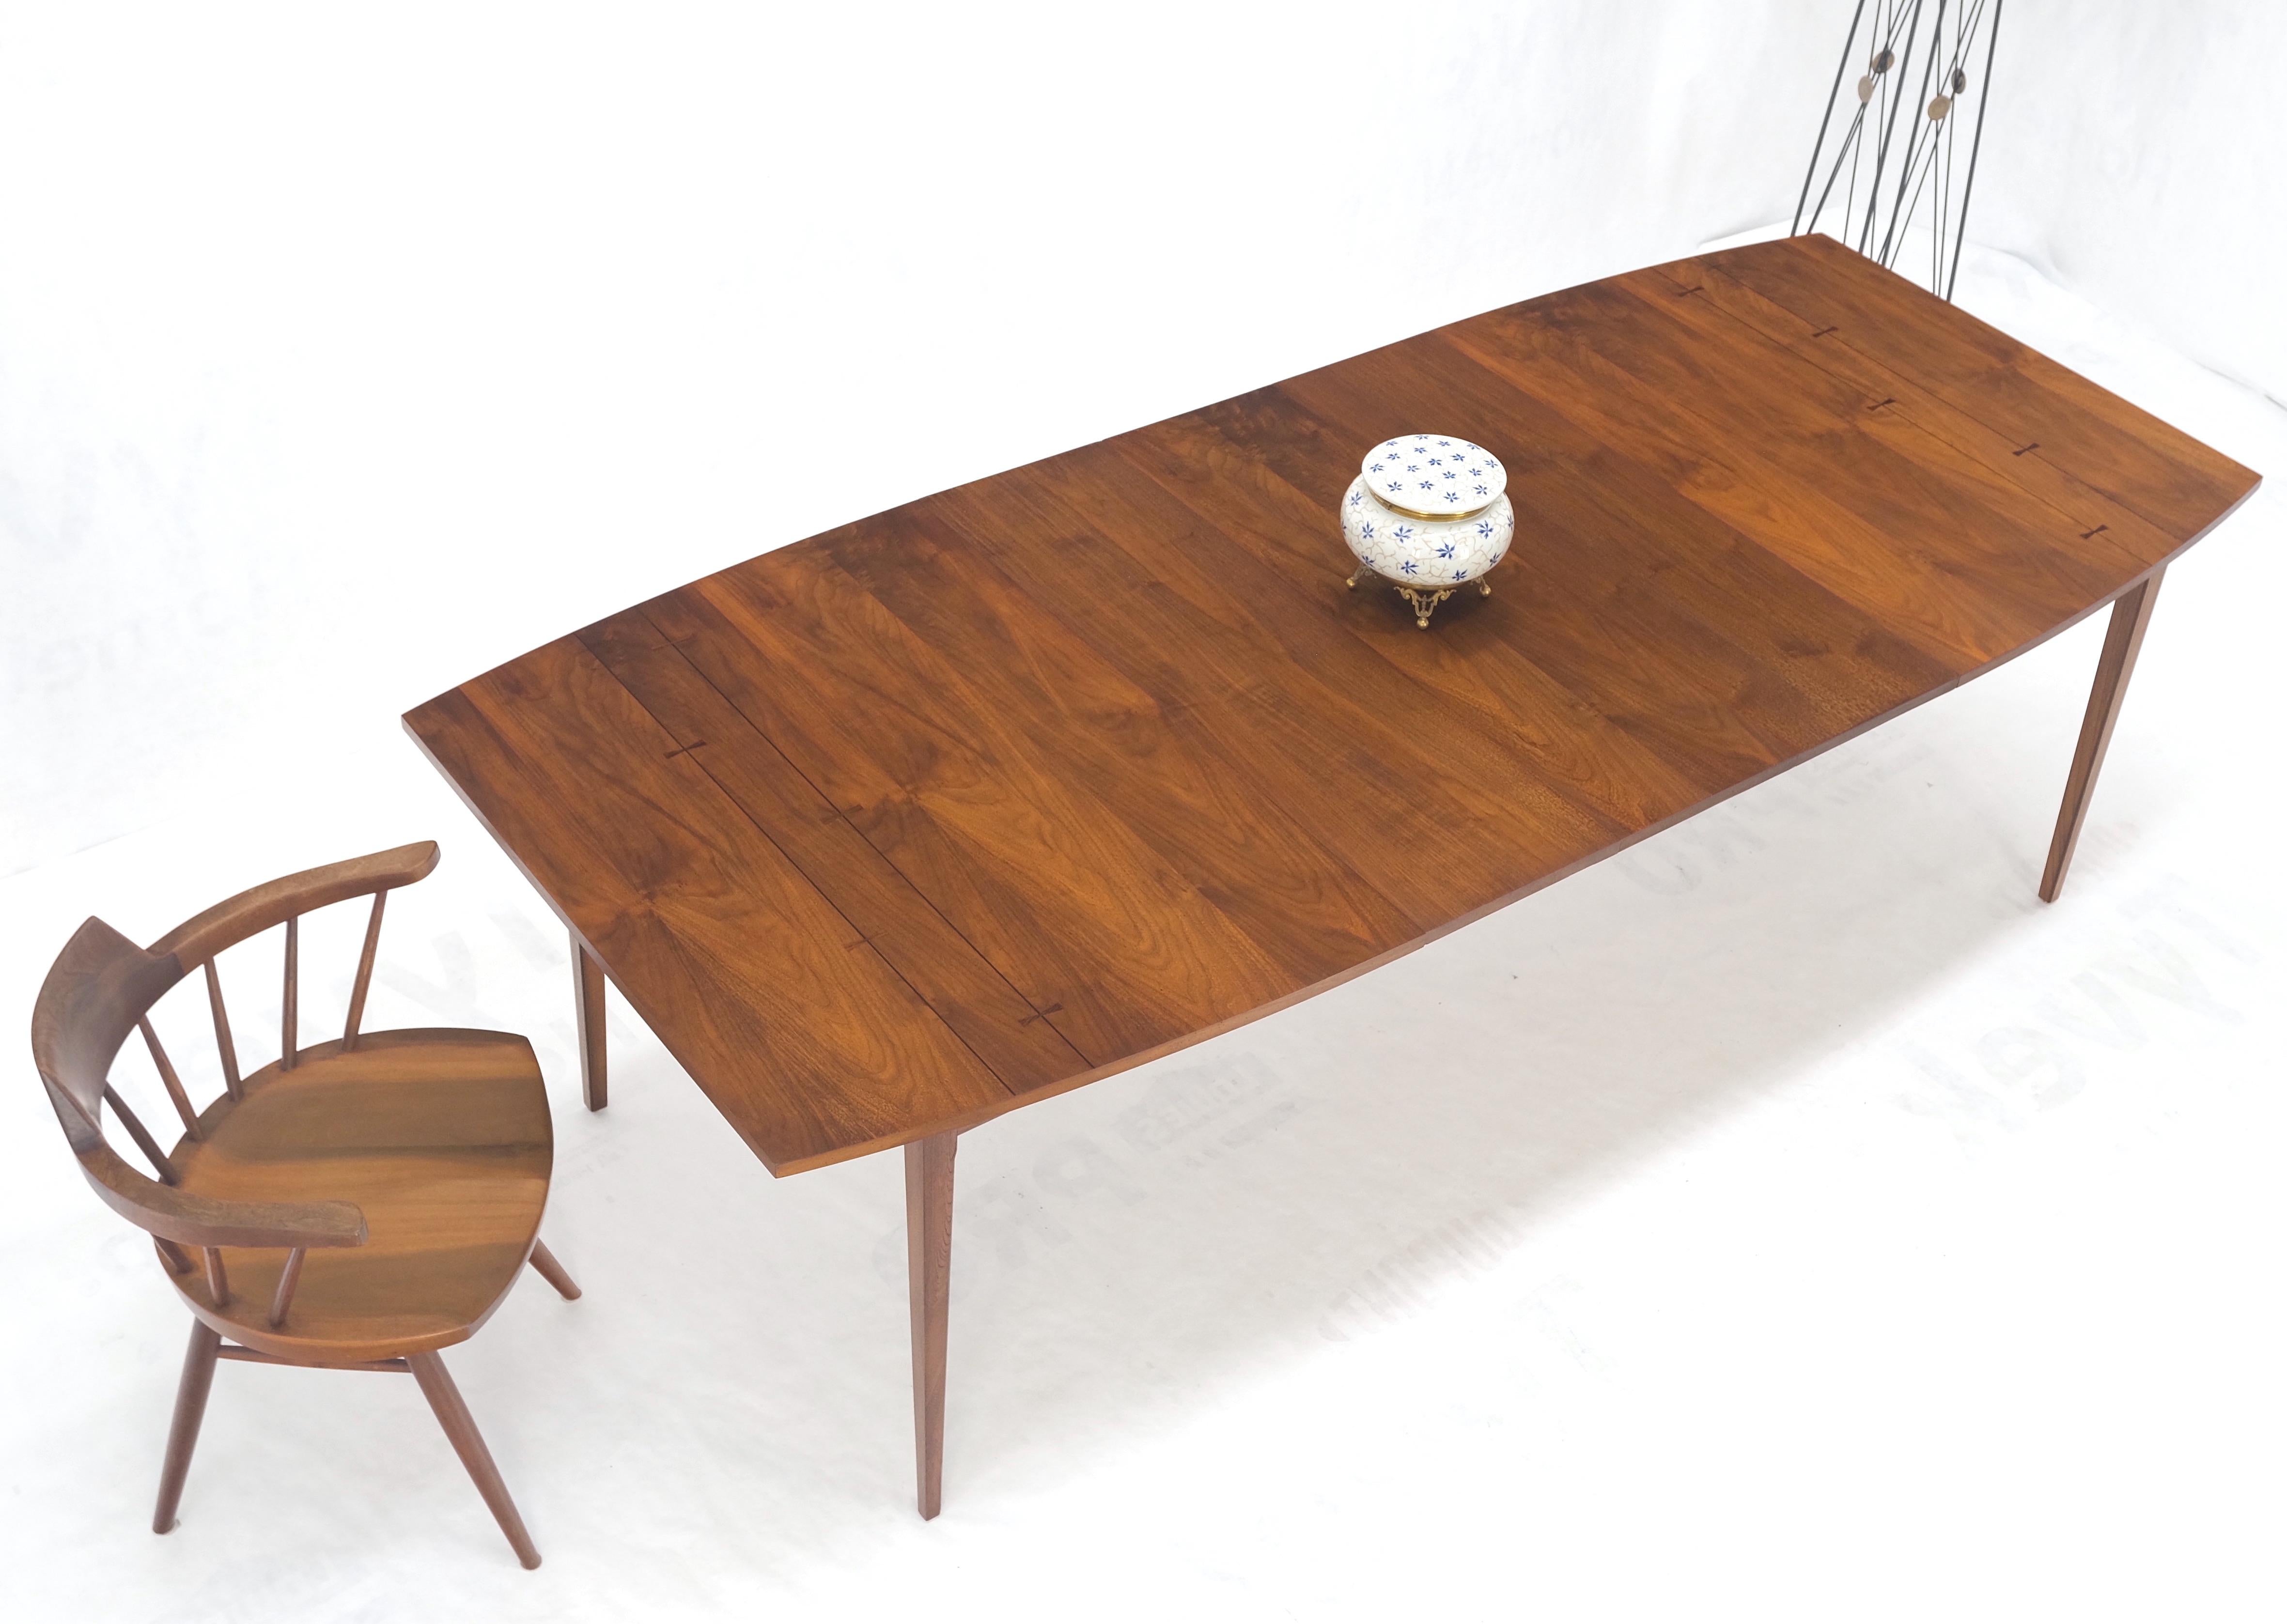 Danish Mid Century Modern Walnut Butterfly Accents Boat Shape Dining Table MINT! For Sale 9